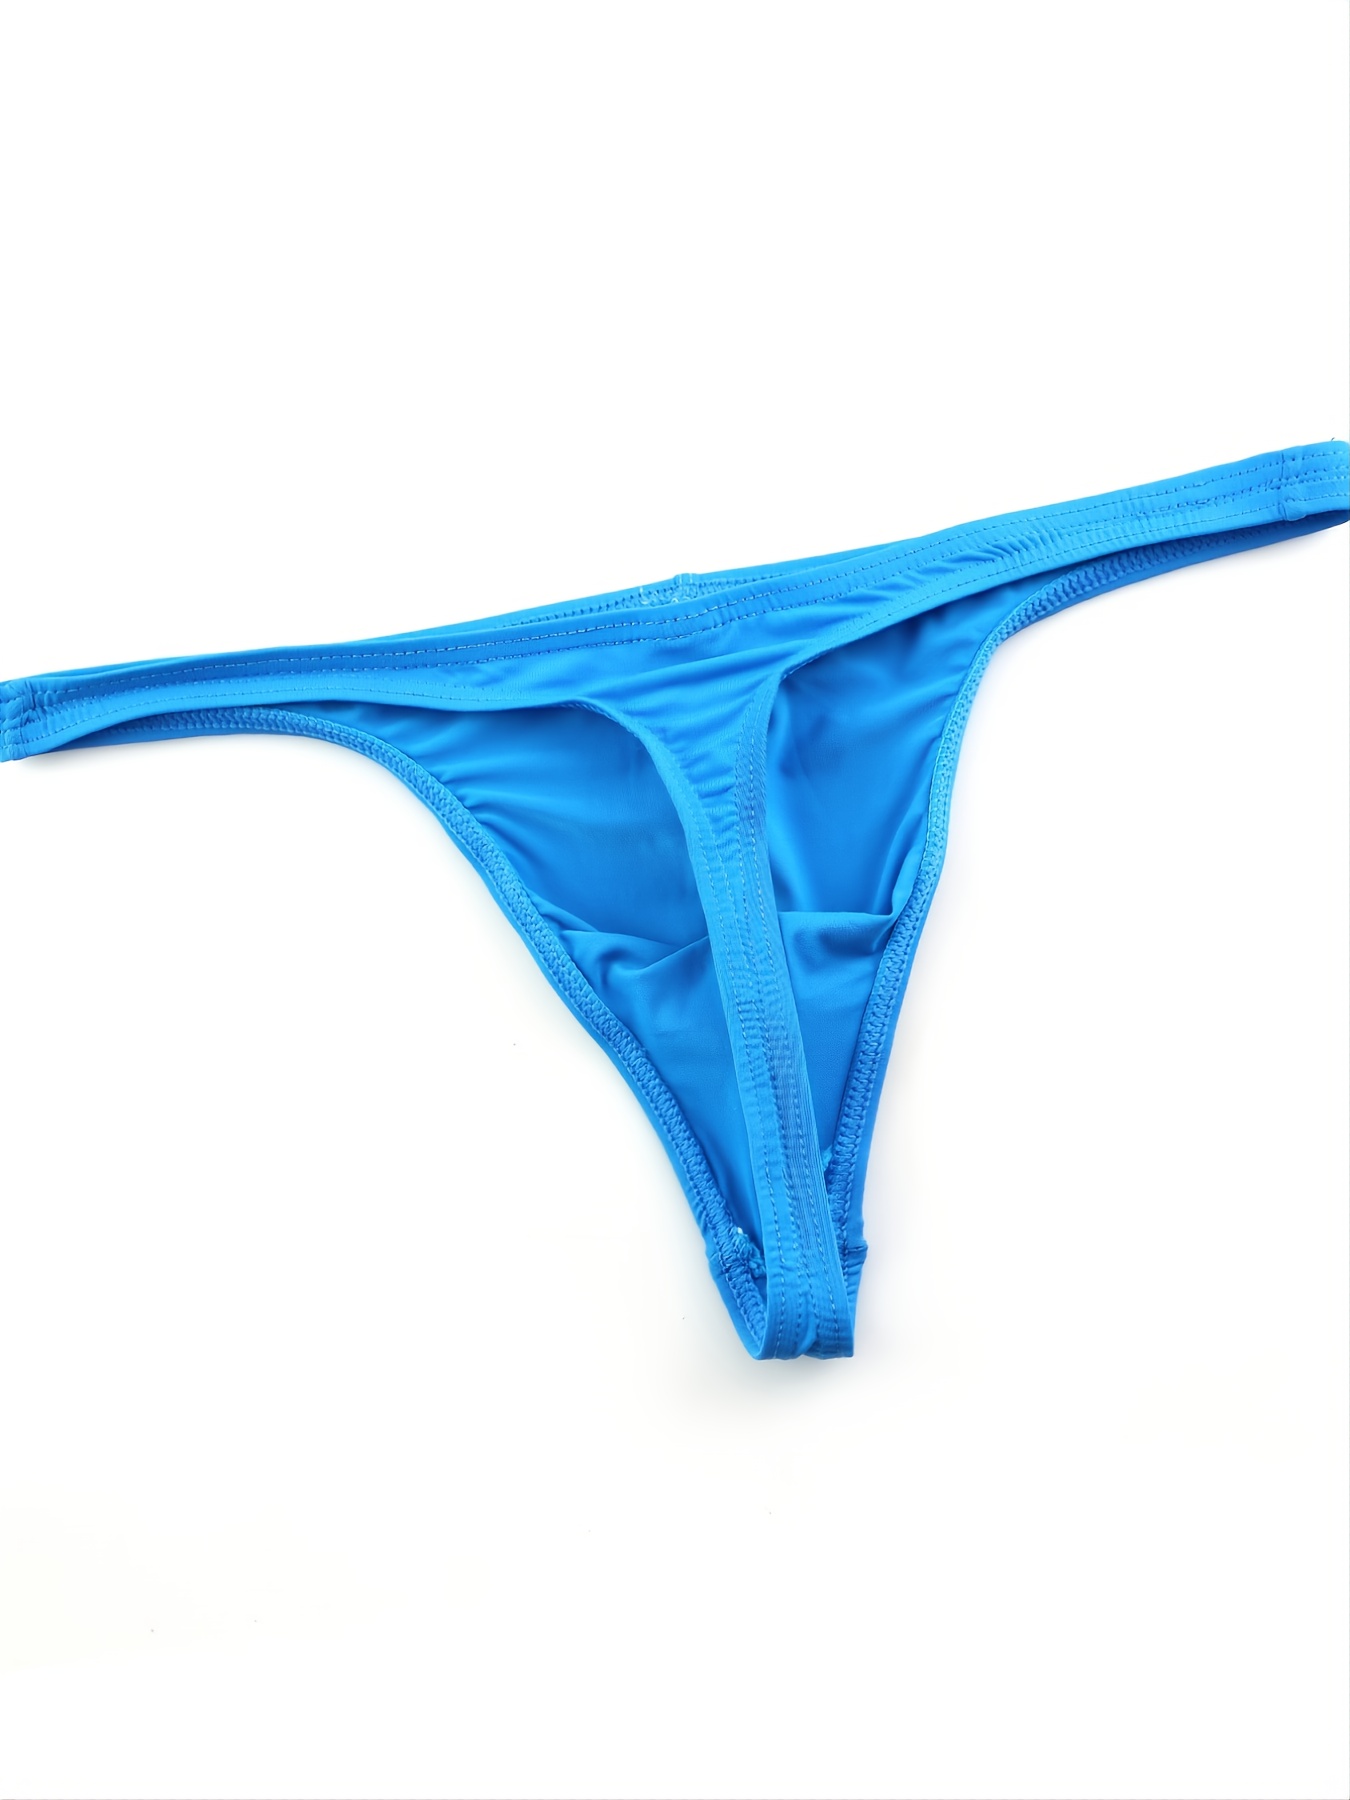 Men's Sexy Thong Stretch Sexy Underwear Available G-Strings Matching With  Sex Toys For Men Gay Adults 